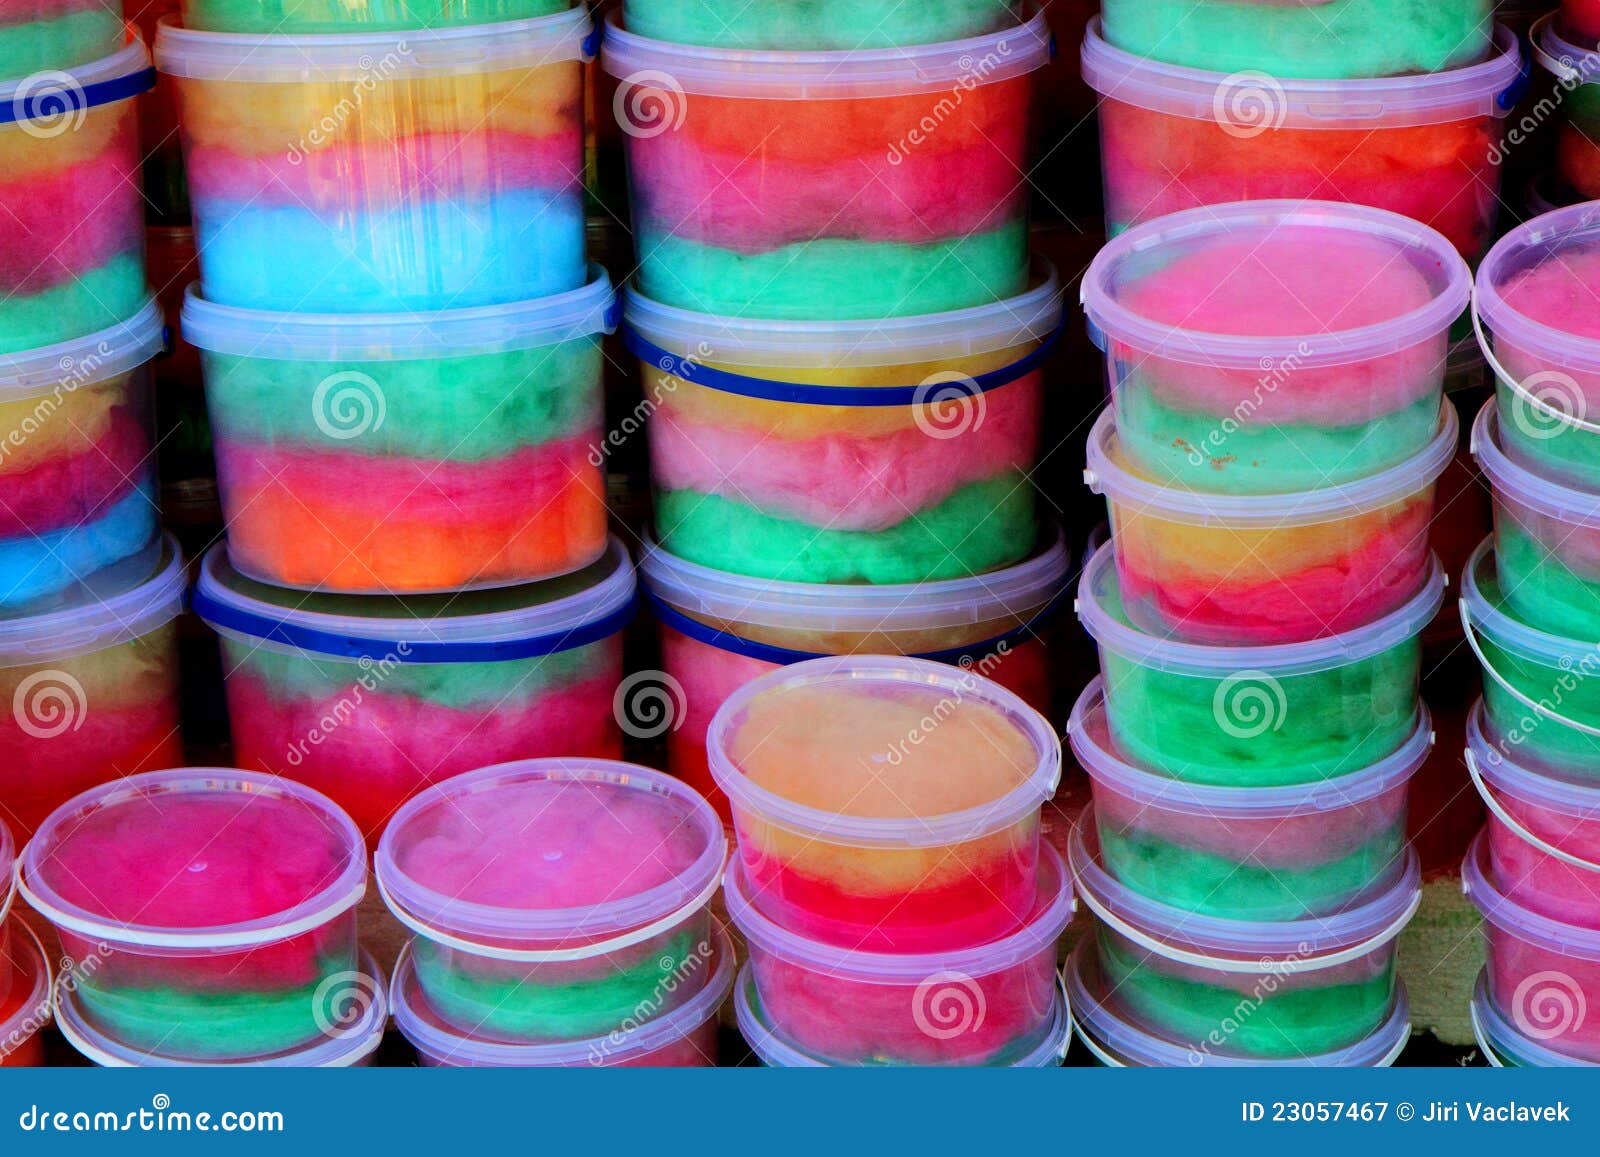 Candy Floss Royalty Free Stock Photography - Image: 23057467